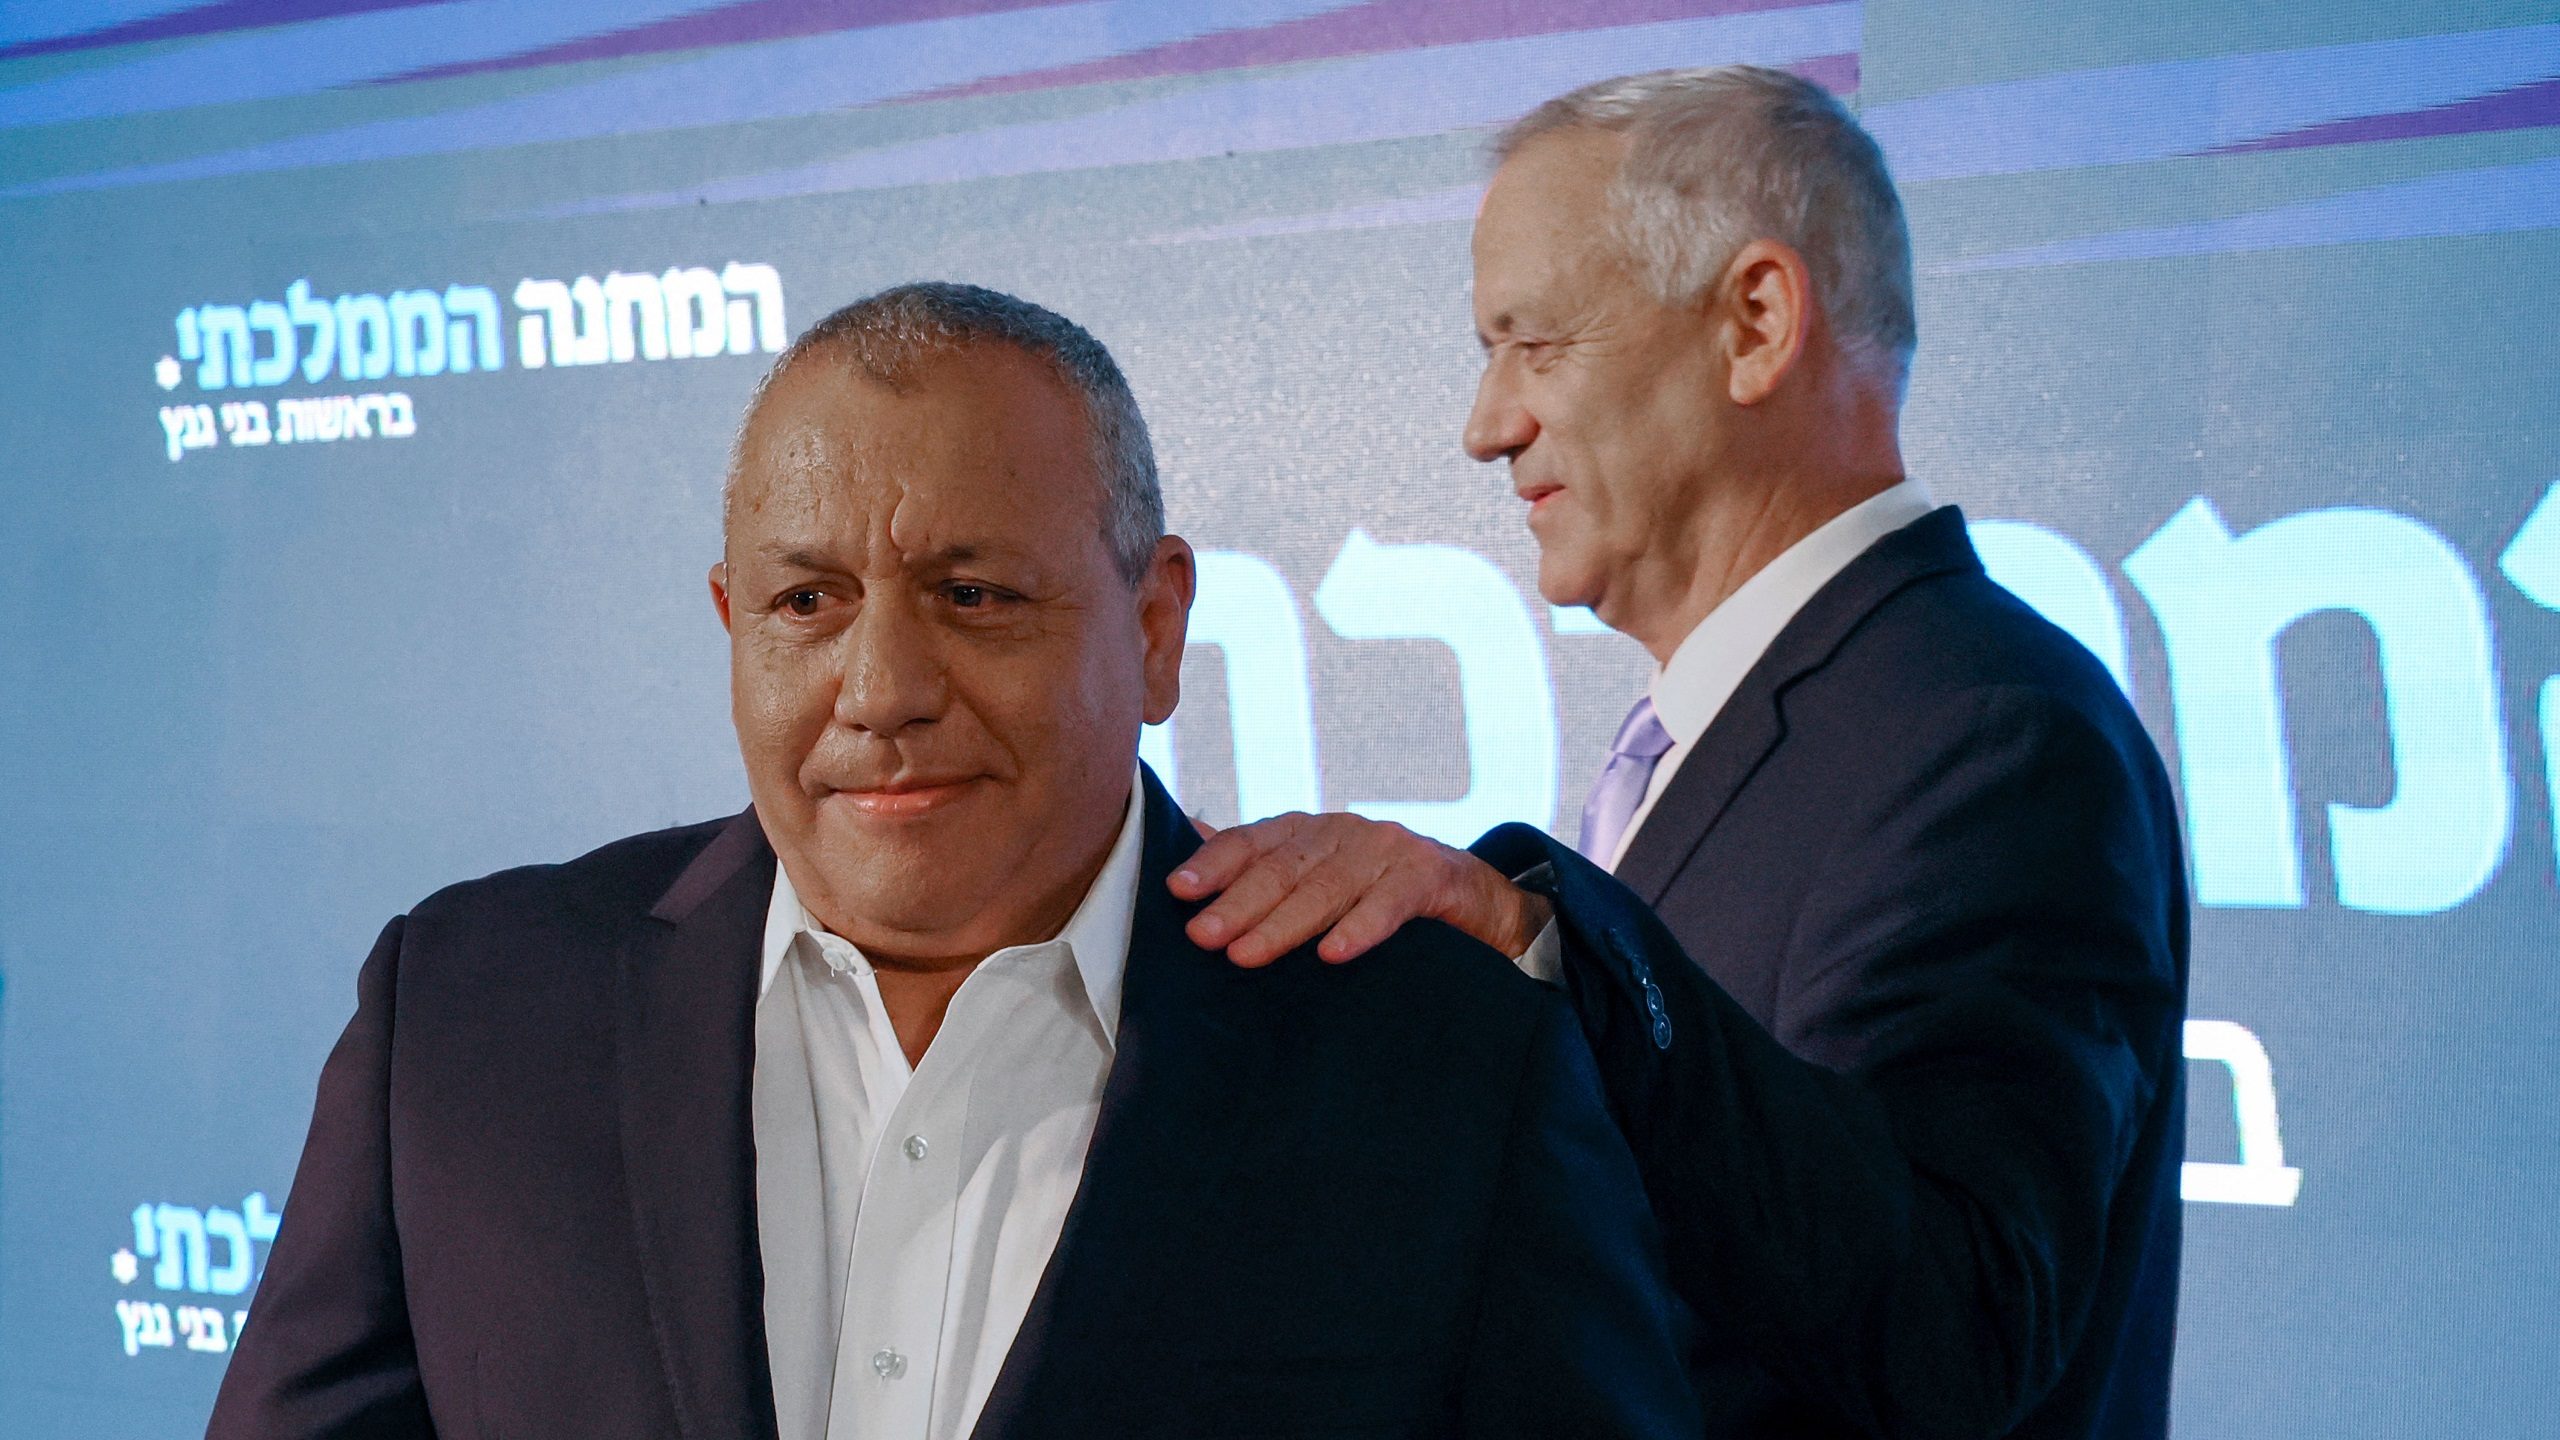 Being an Authority on Security Is No Longer Key To Winning Israeli Elections